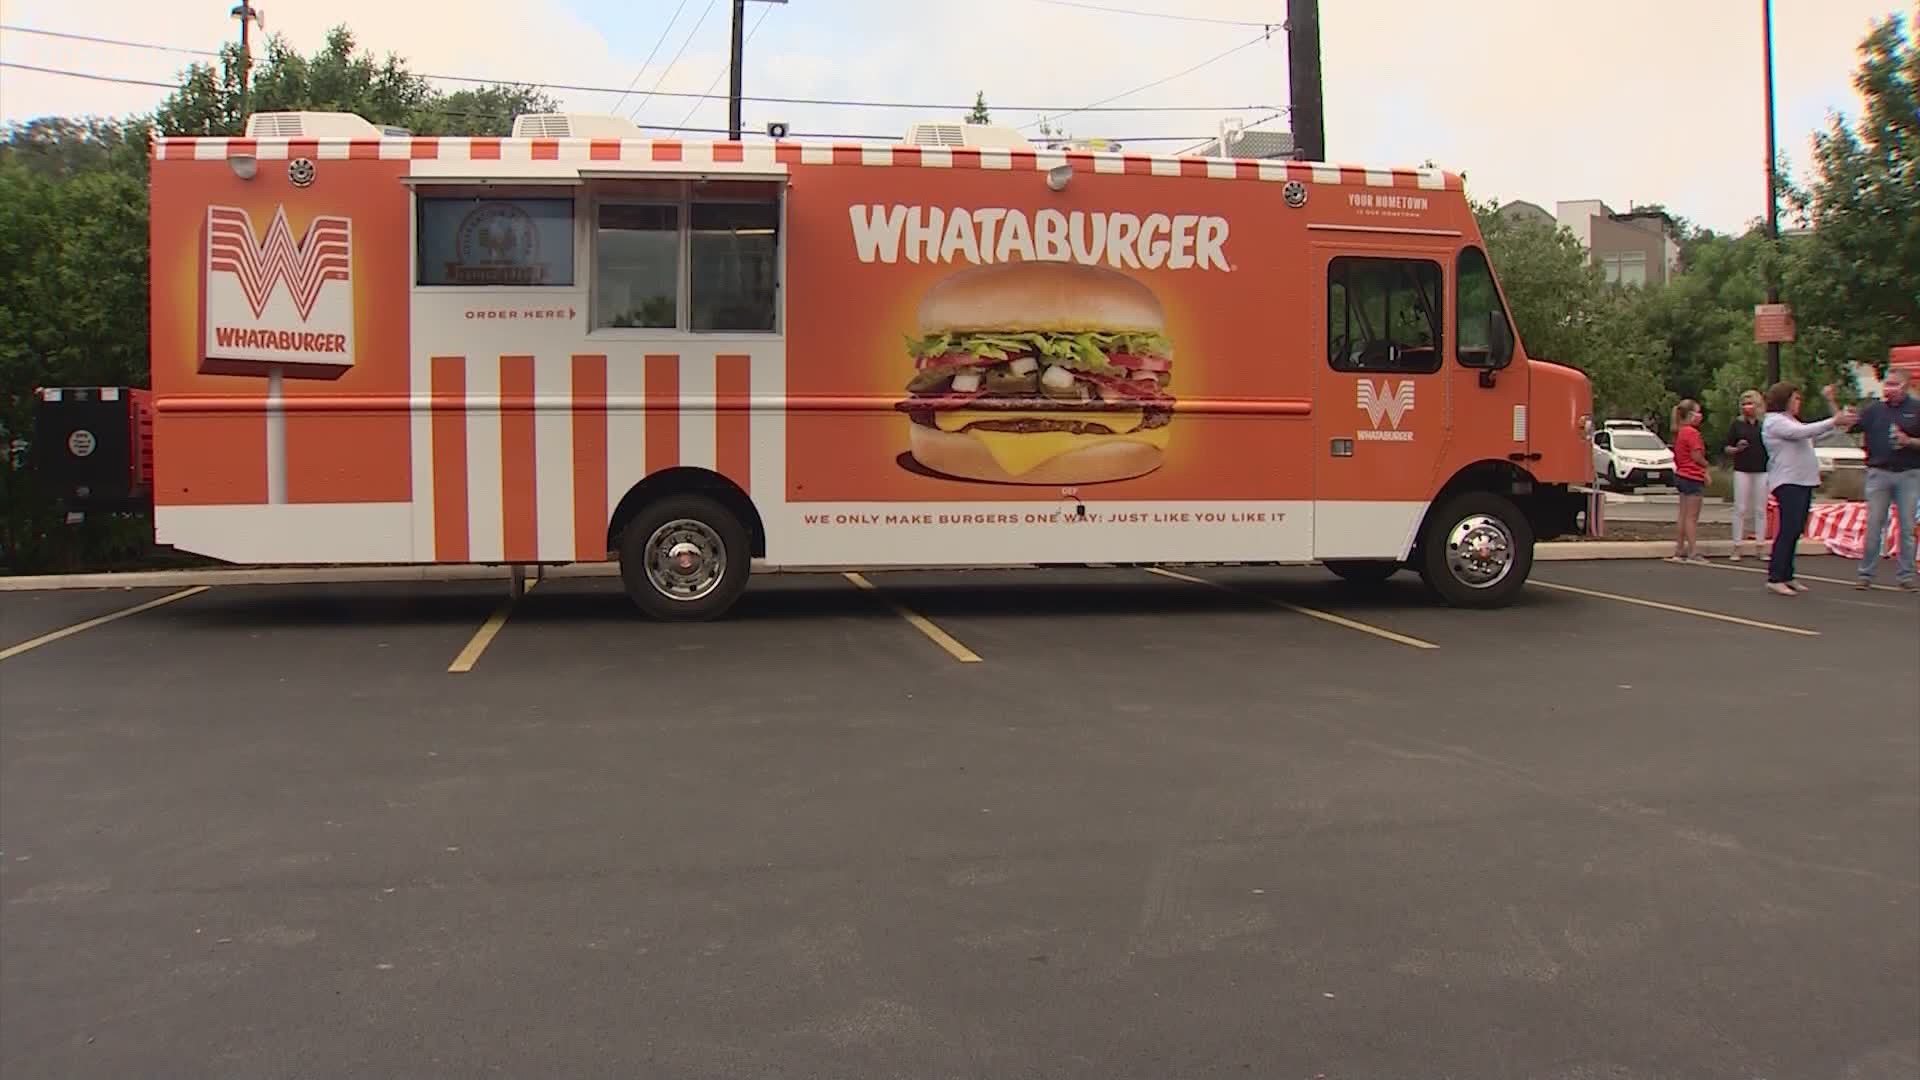 The food truck comes in celebration of Whataburger’s 70th anniversary week.